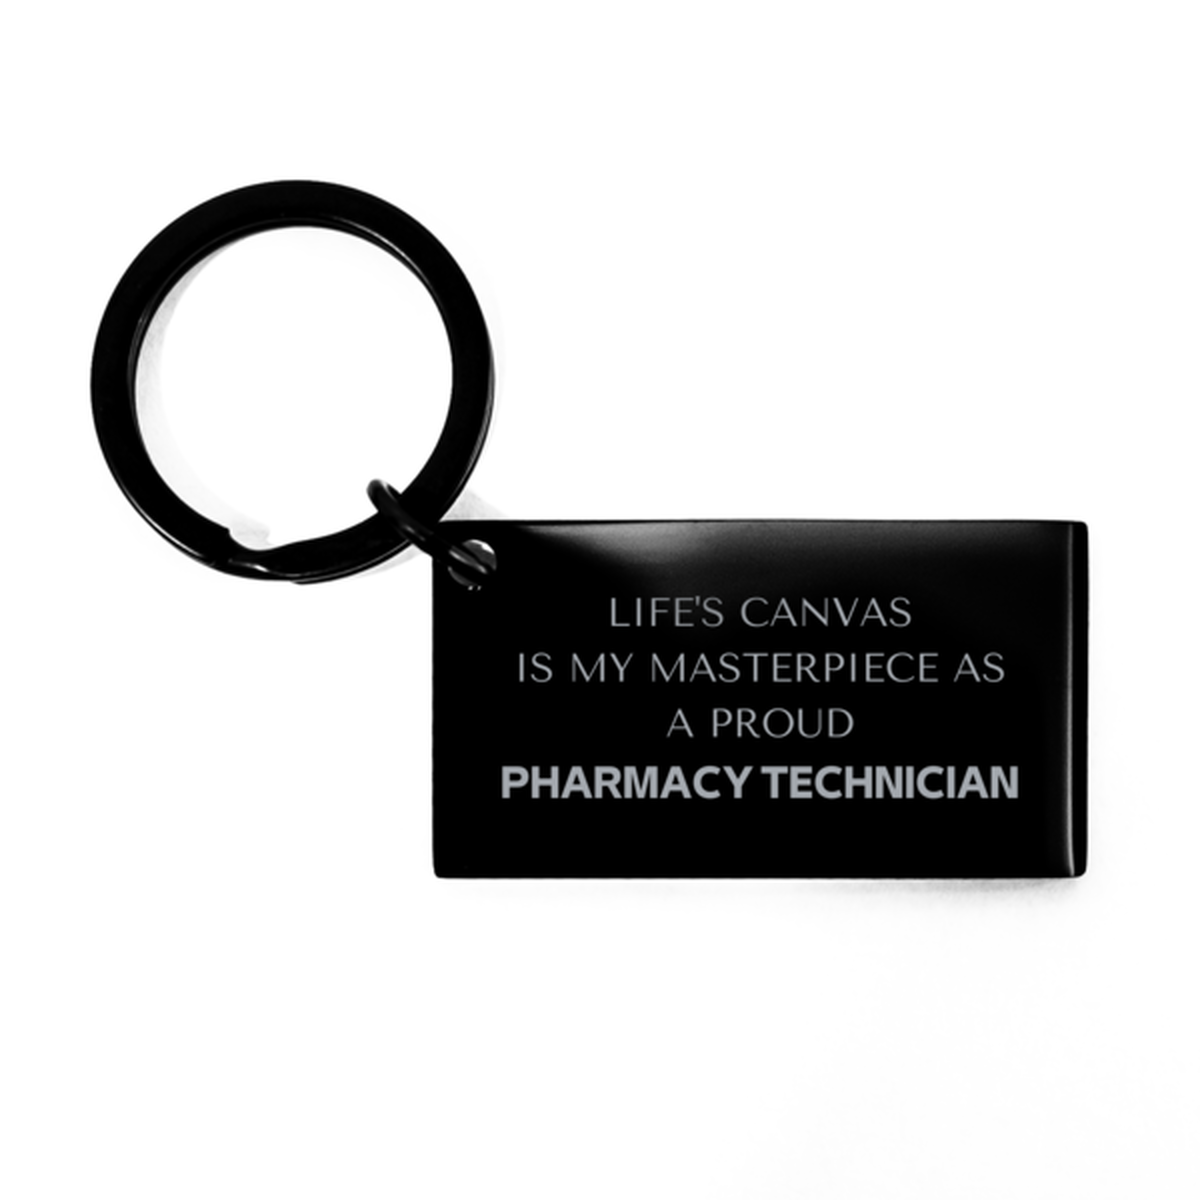 Proud Pharmacy Technician Gifts, Life's canvas is my masterpiece, Epic Birthday Christmas Unique Keychain For Pharmacy Technician, Coworkers, Men, Women, Friends